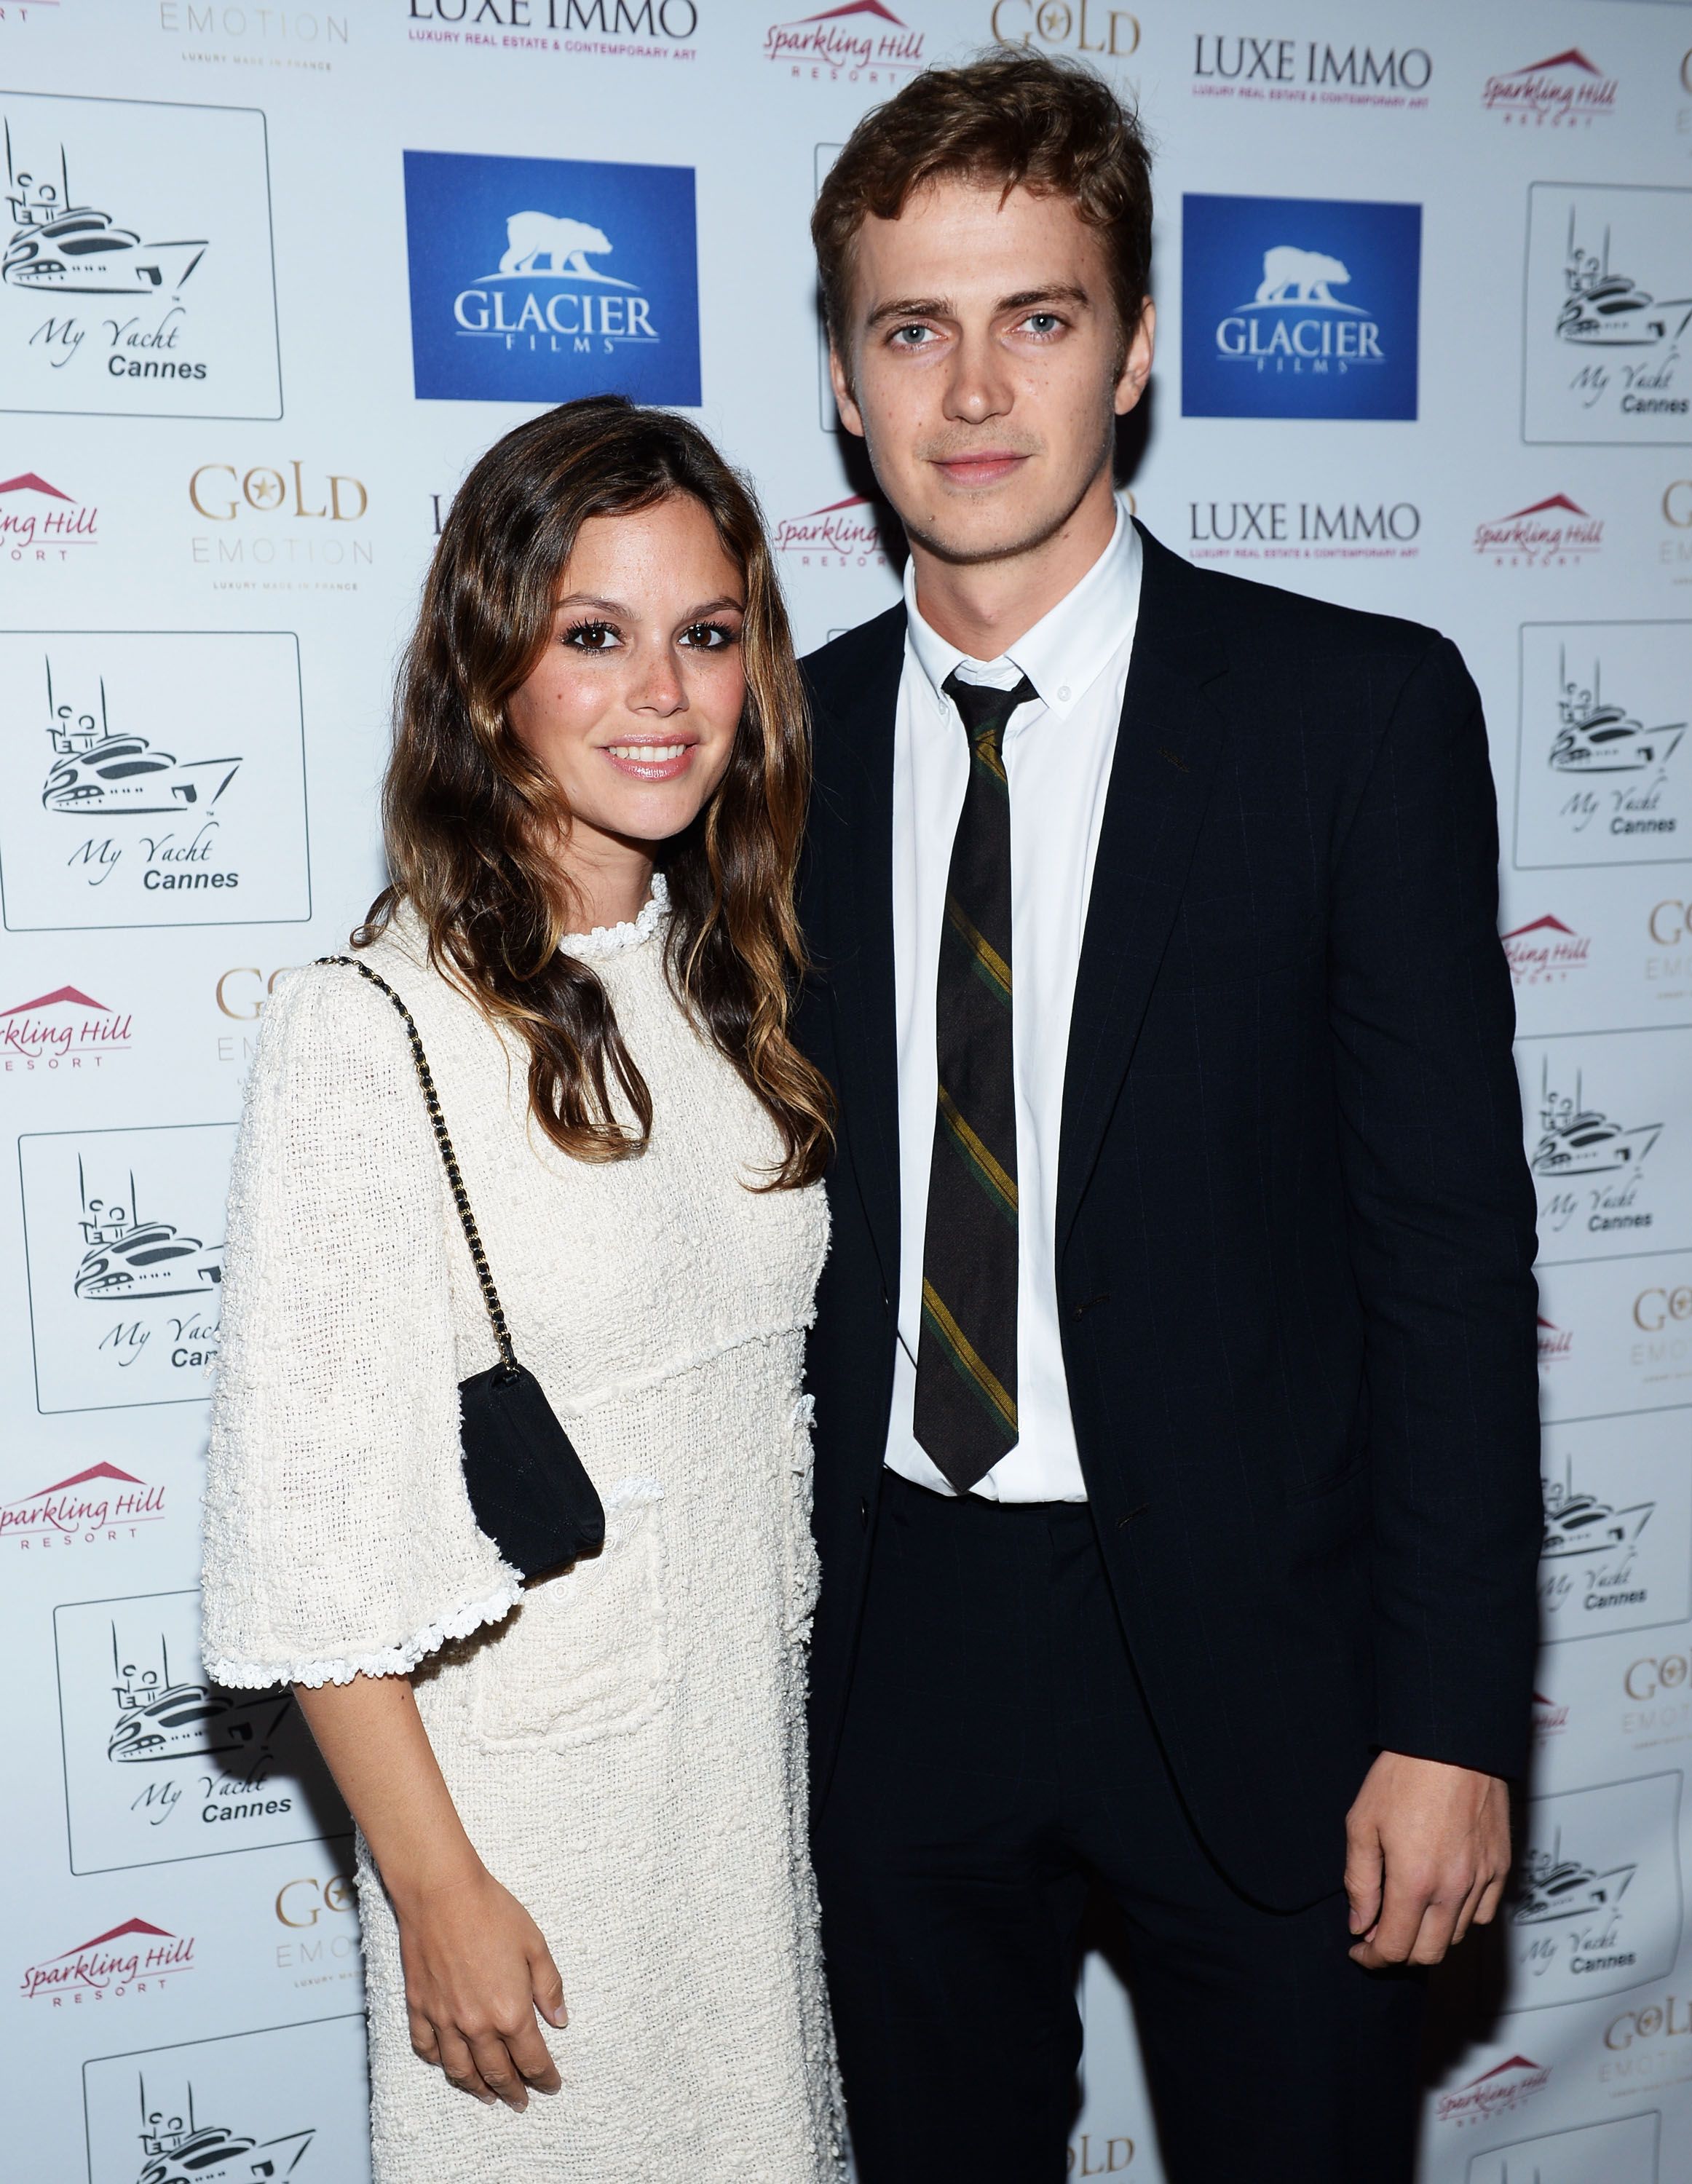 Rachel Bilson and Hayden Christensen during the Glacier Films launch party on May 19, 2013 in Cannes, France | Source: Getty Images